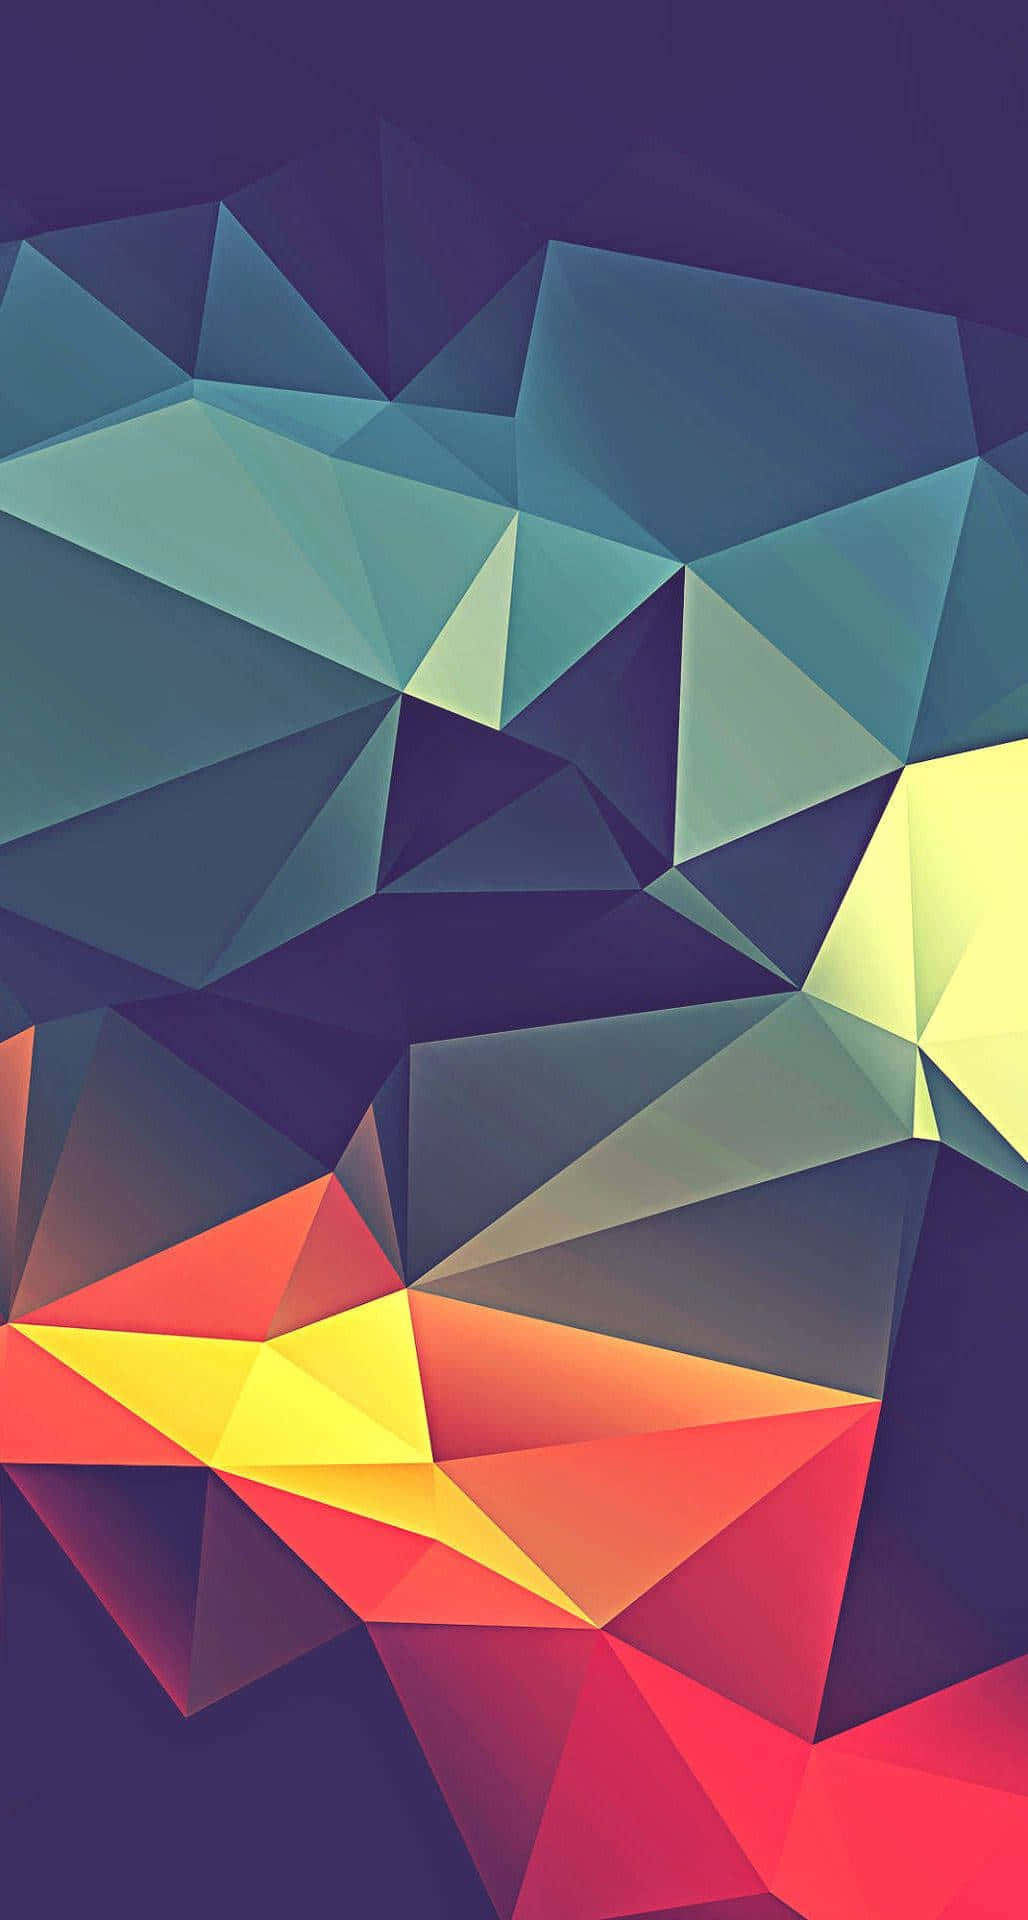 Colorful Geometric Abstract Background.jpg Wallpaper